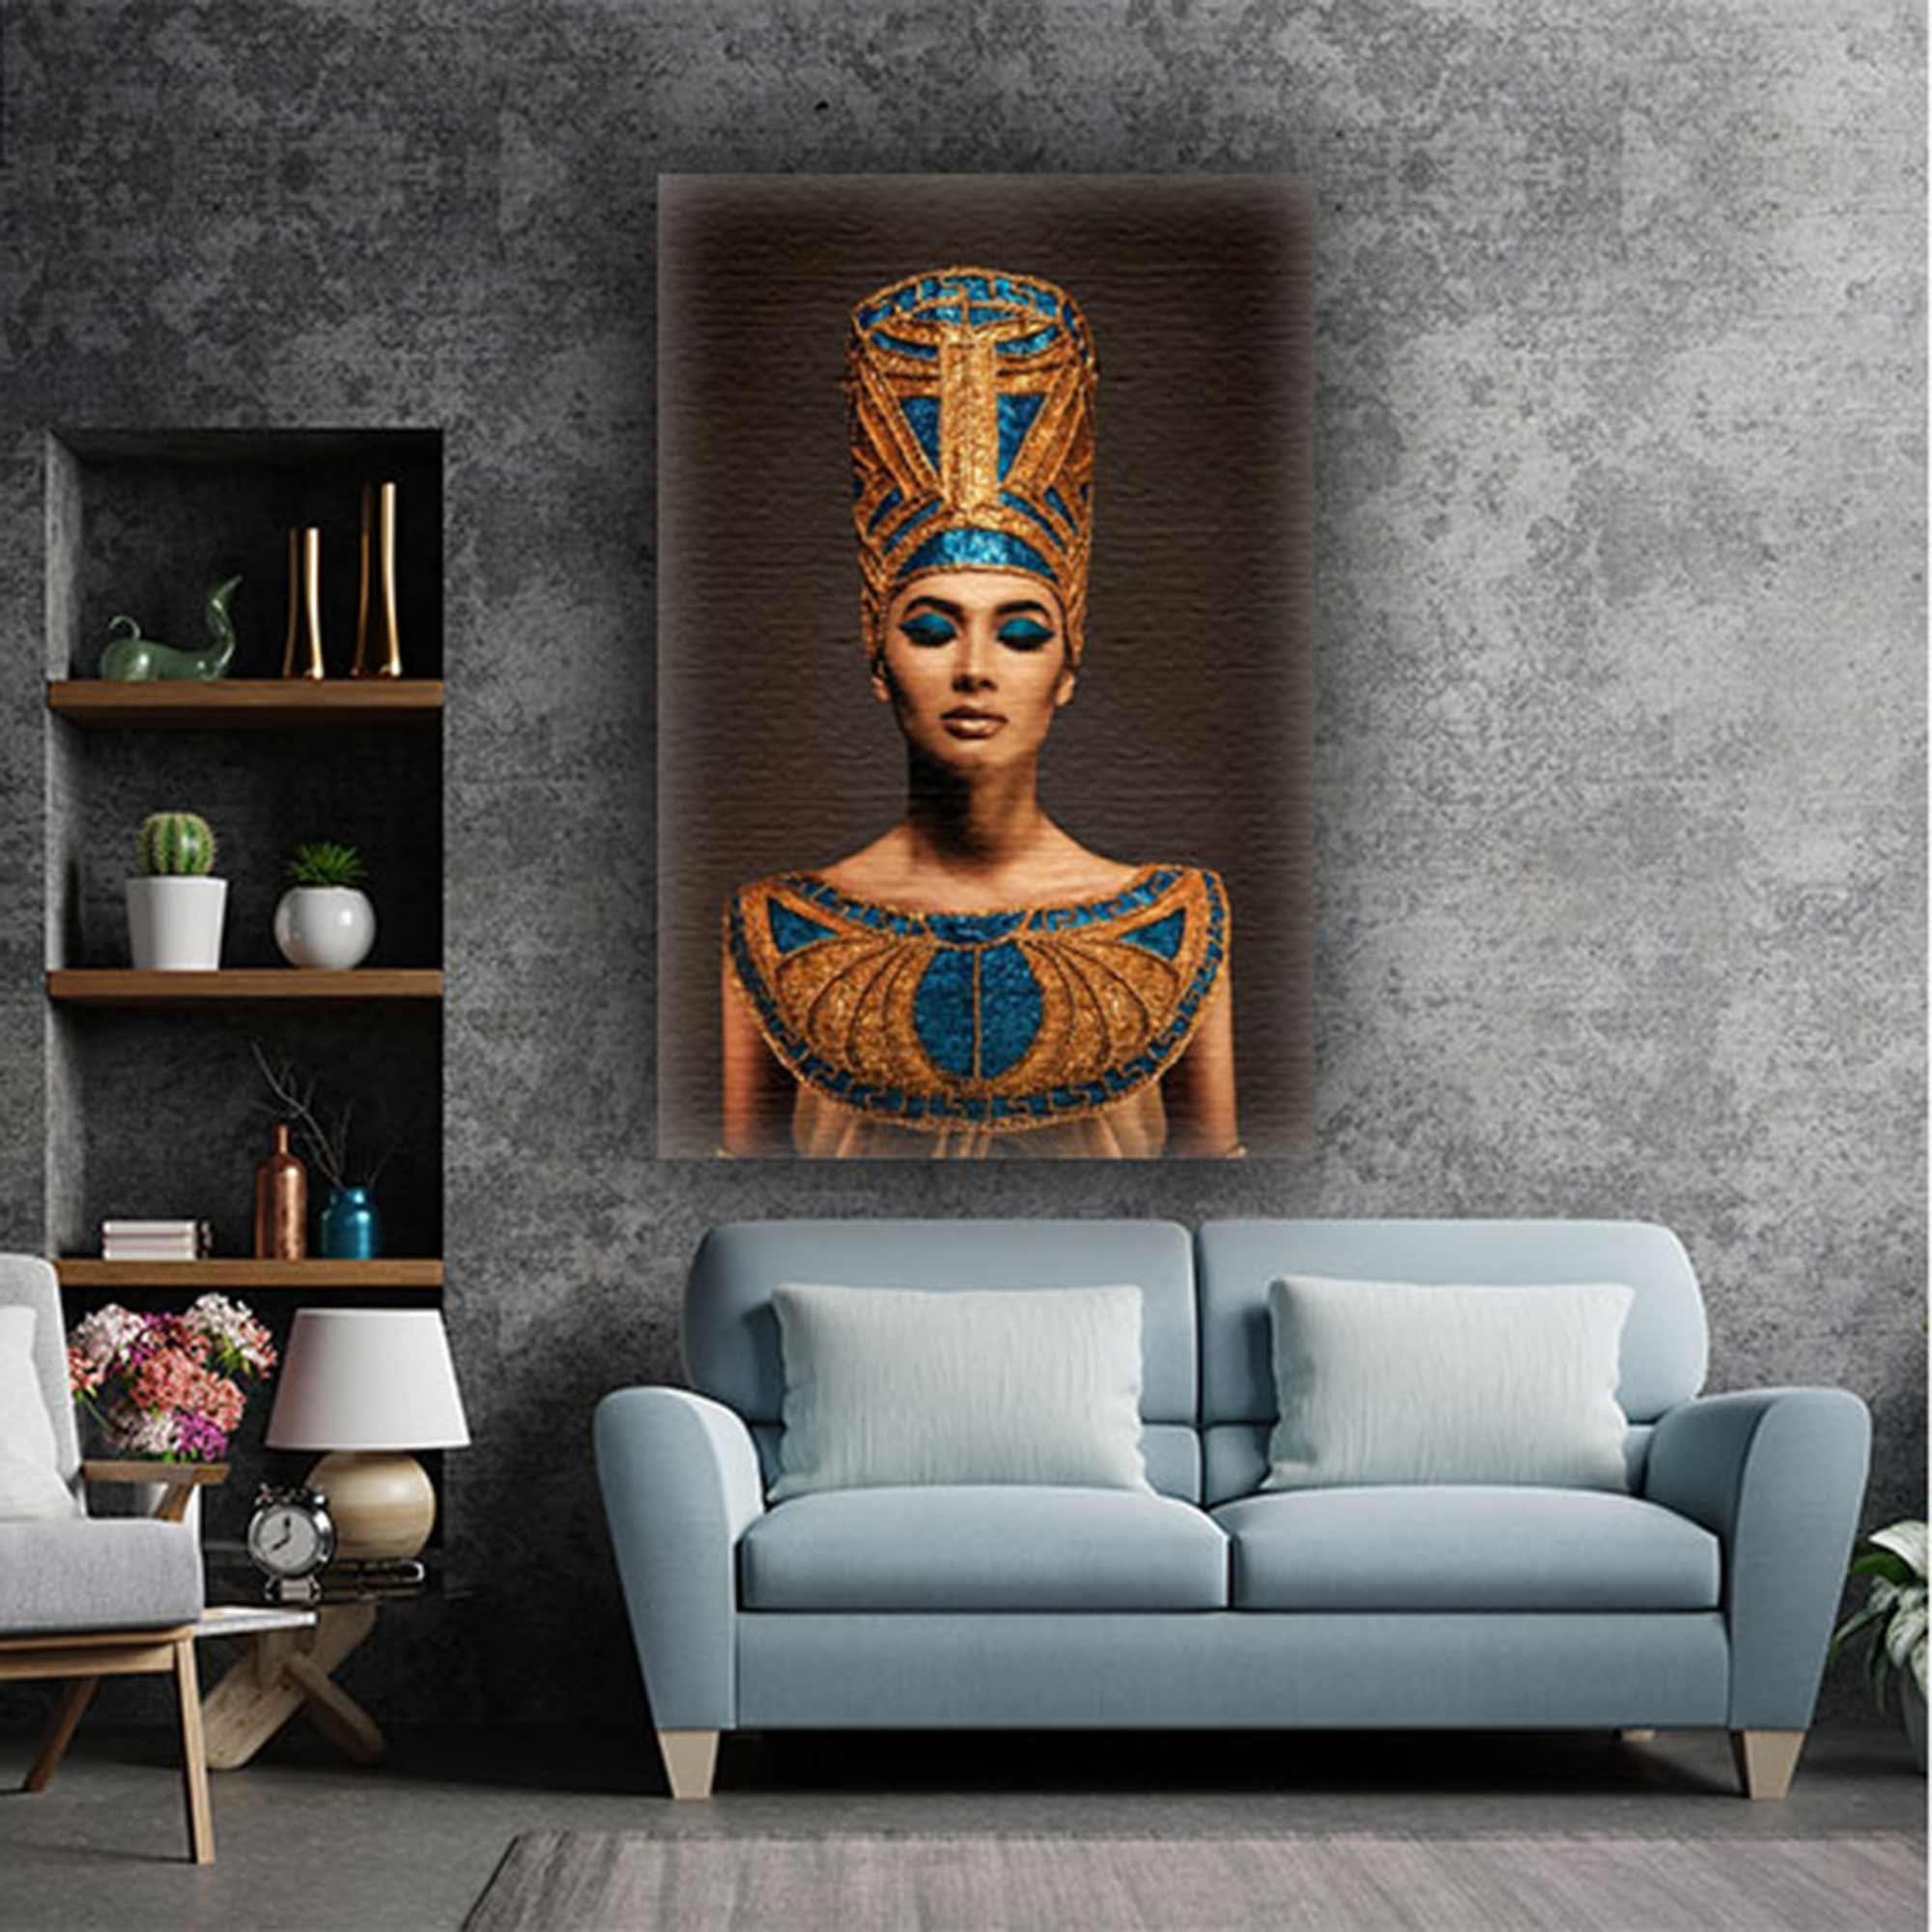 Queen Nefertiti Egyptian Woman Traditional Dress Ancient Roll up Canvas ...